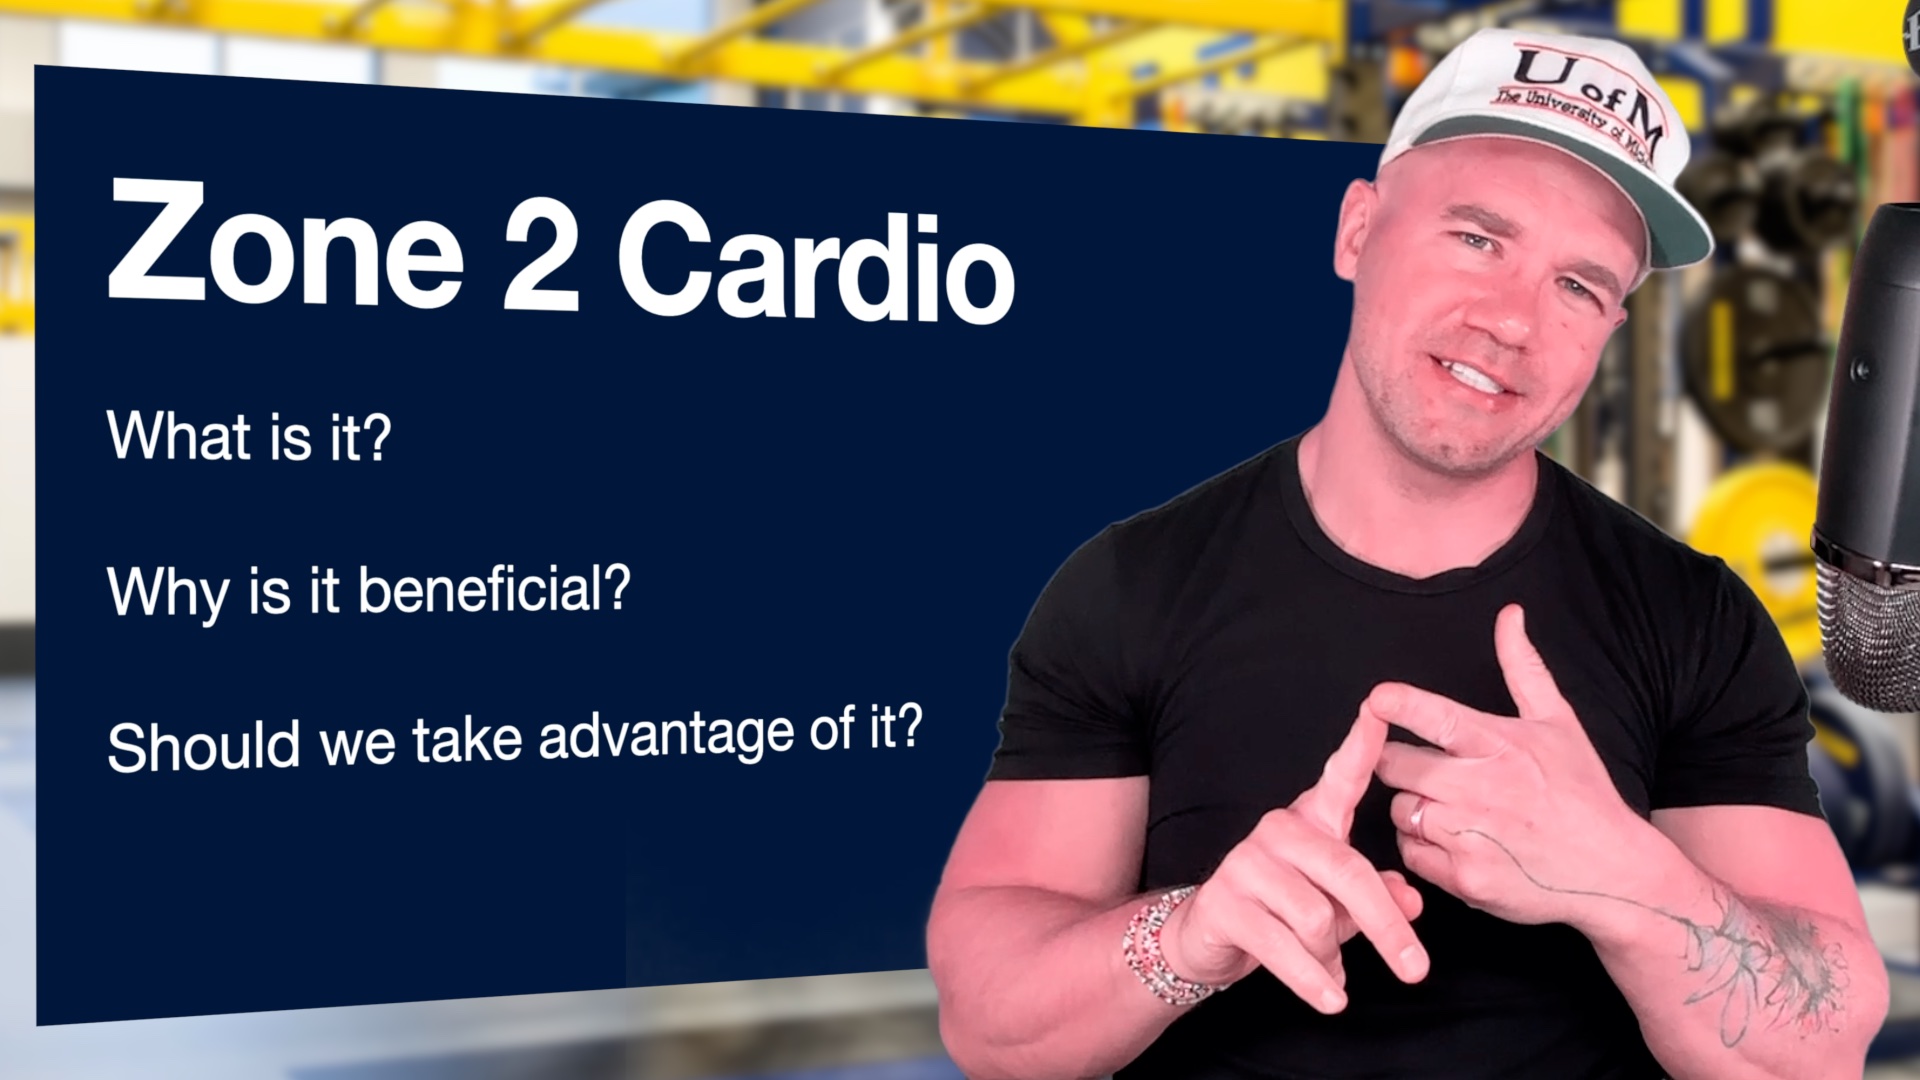 research on zone 2 cardio